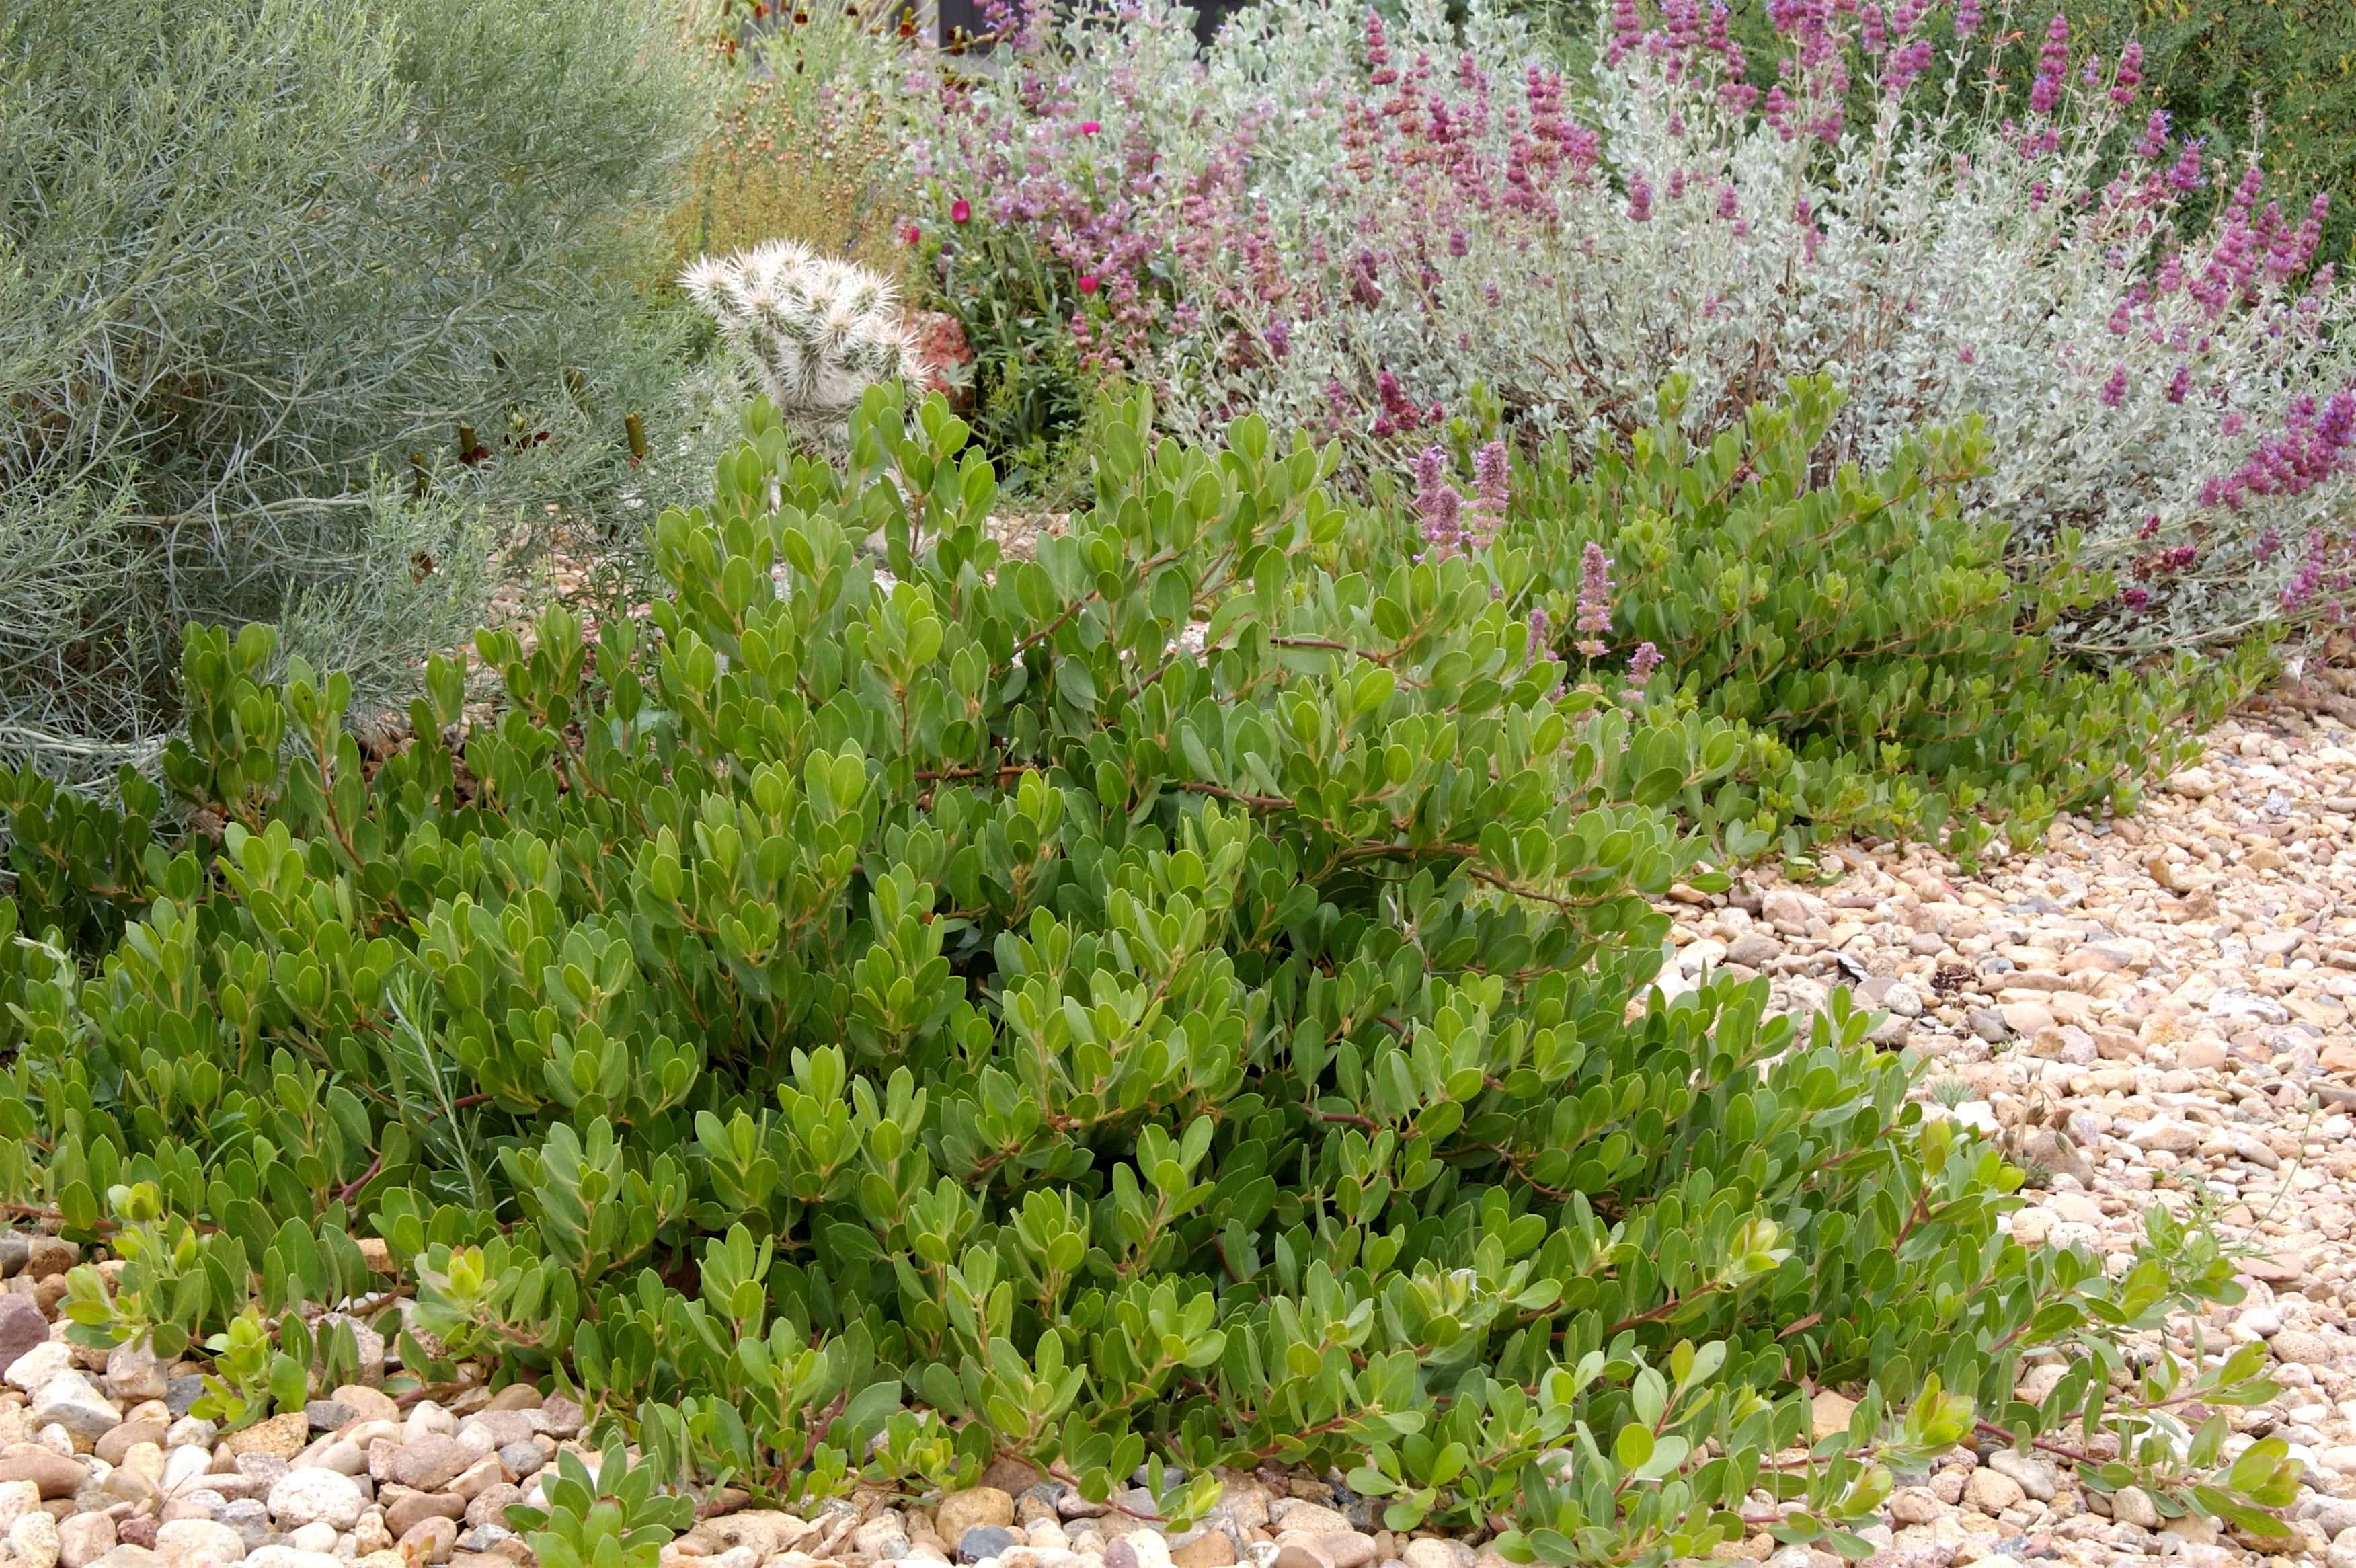 Arctostaphylos-x-coloradoensis-Panchito-2-D.-Winger